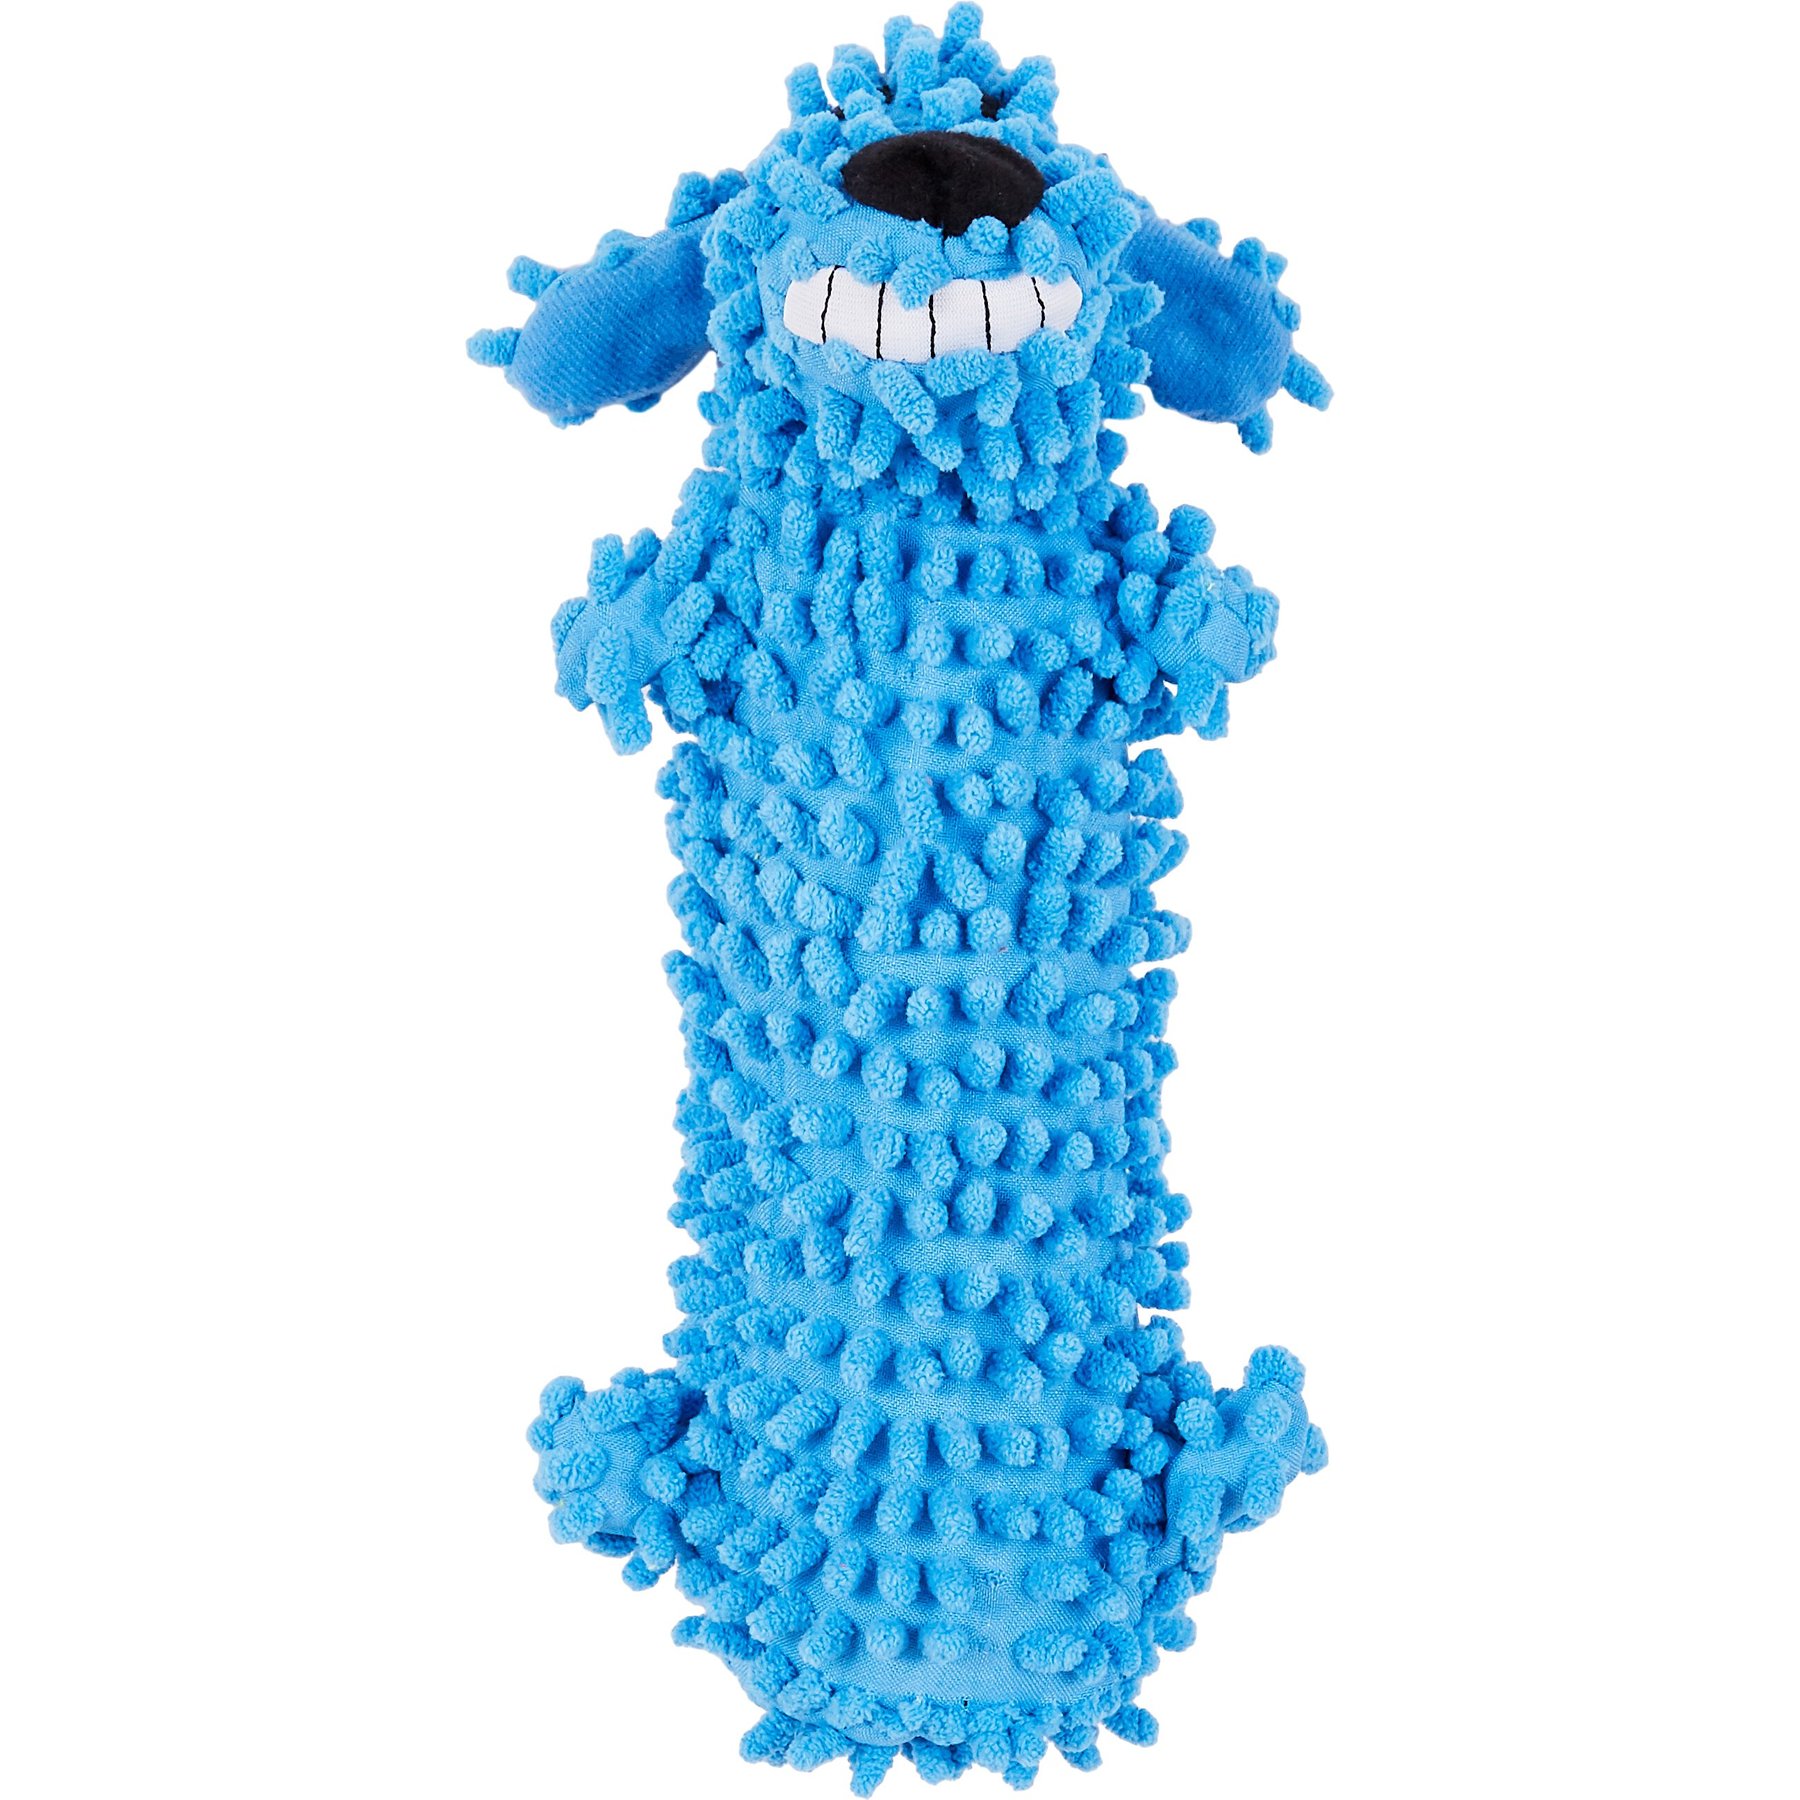 Multipet Loofa Floppy Water Bottle Buddies Squeaky Plush Dog Toy, Color Varies